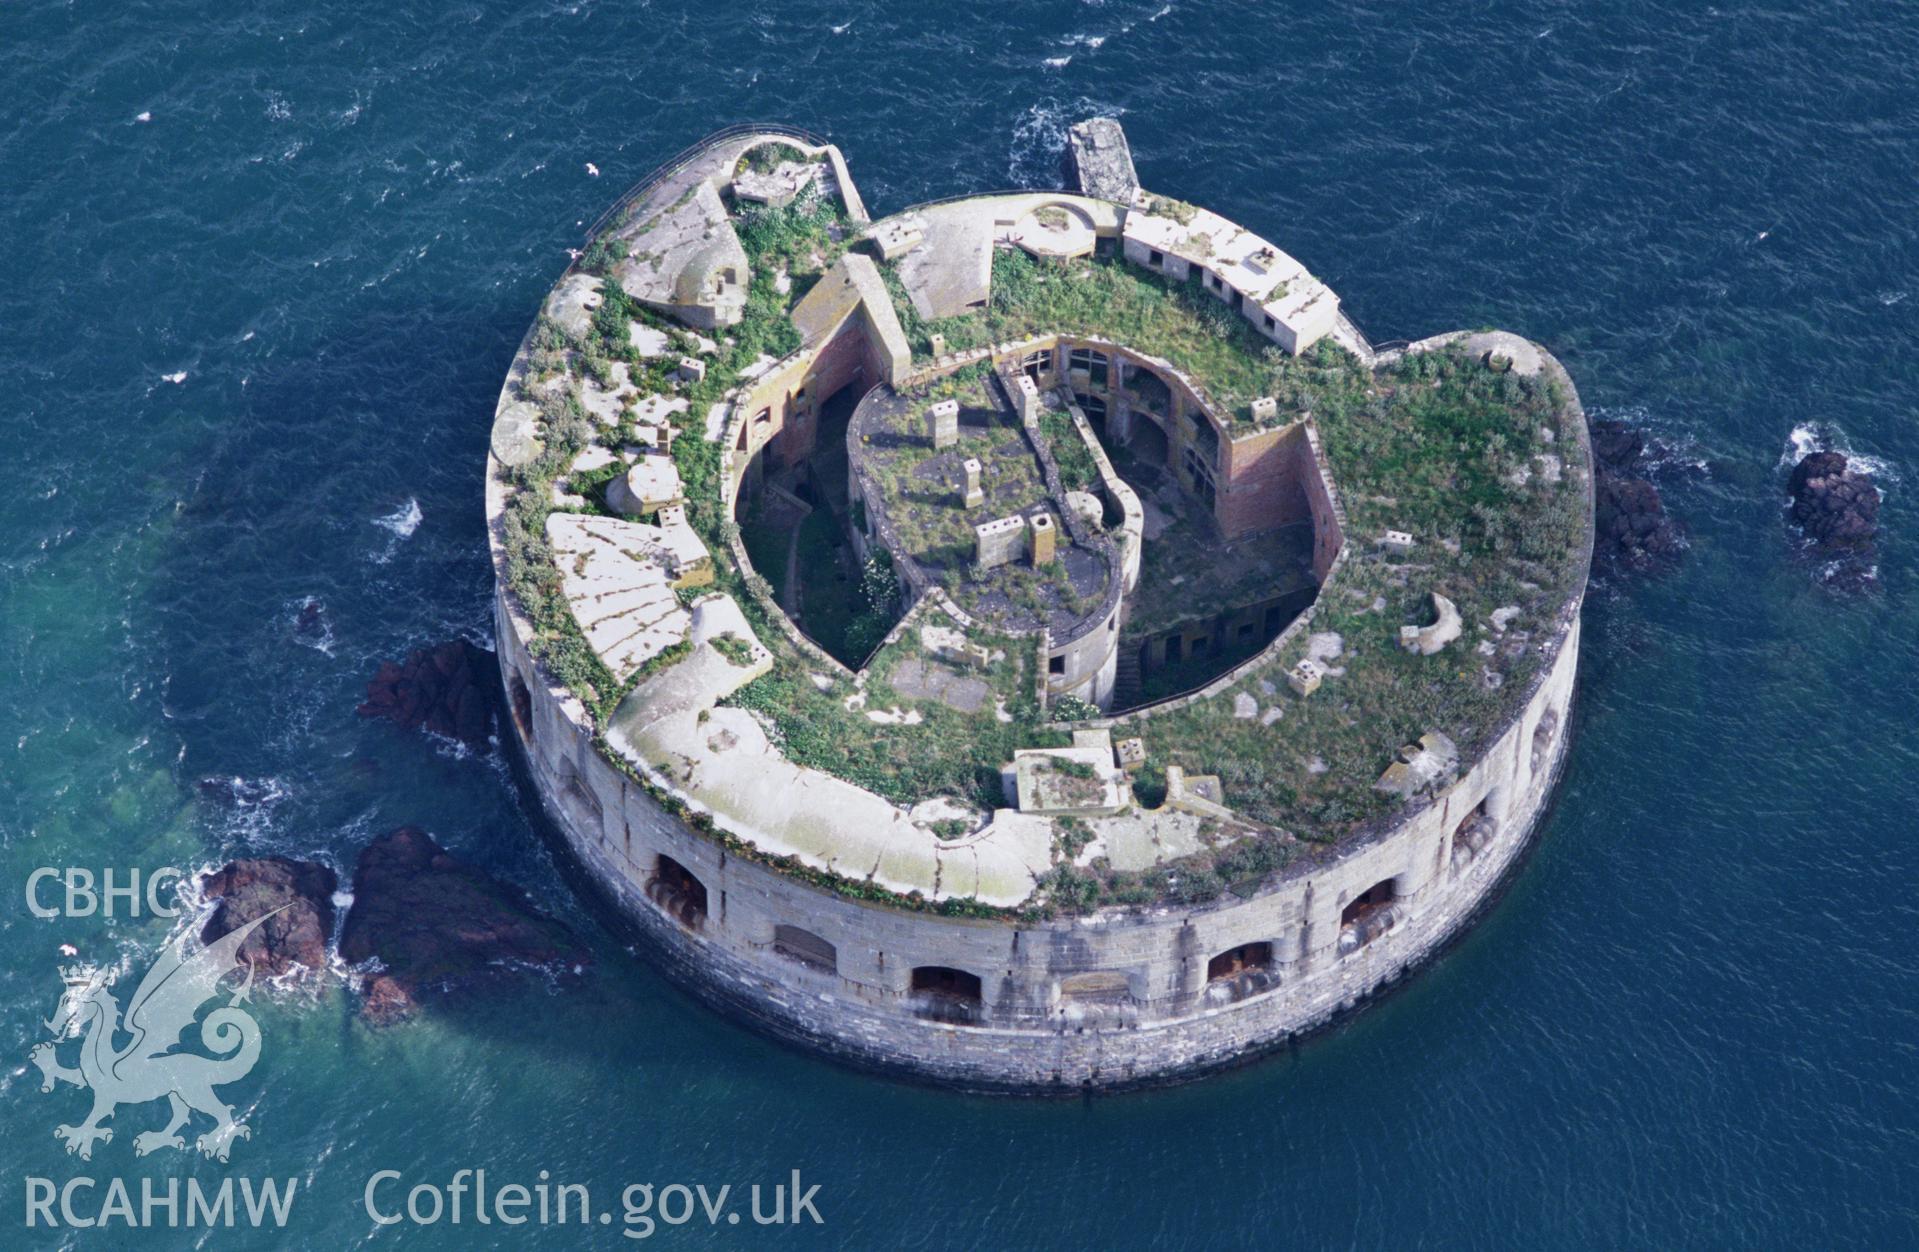 RCAHMW colour oblique aerial photograph of Stack Rock Fort, detailed view. Taken by Toby Driver on 28/06/2002